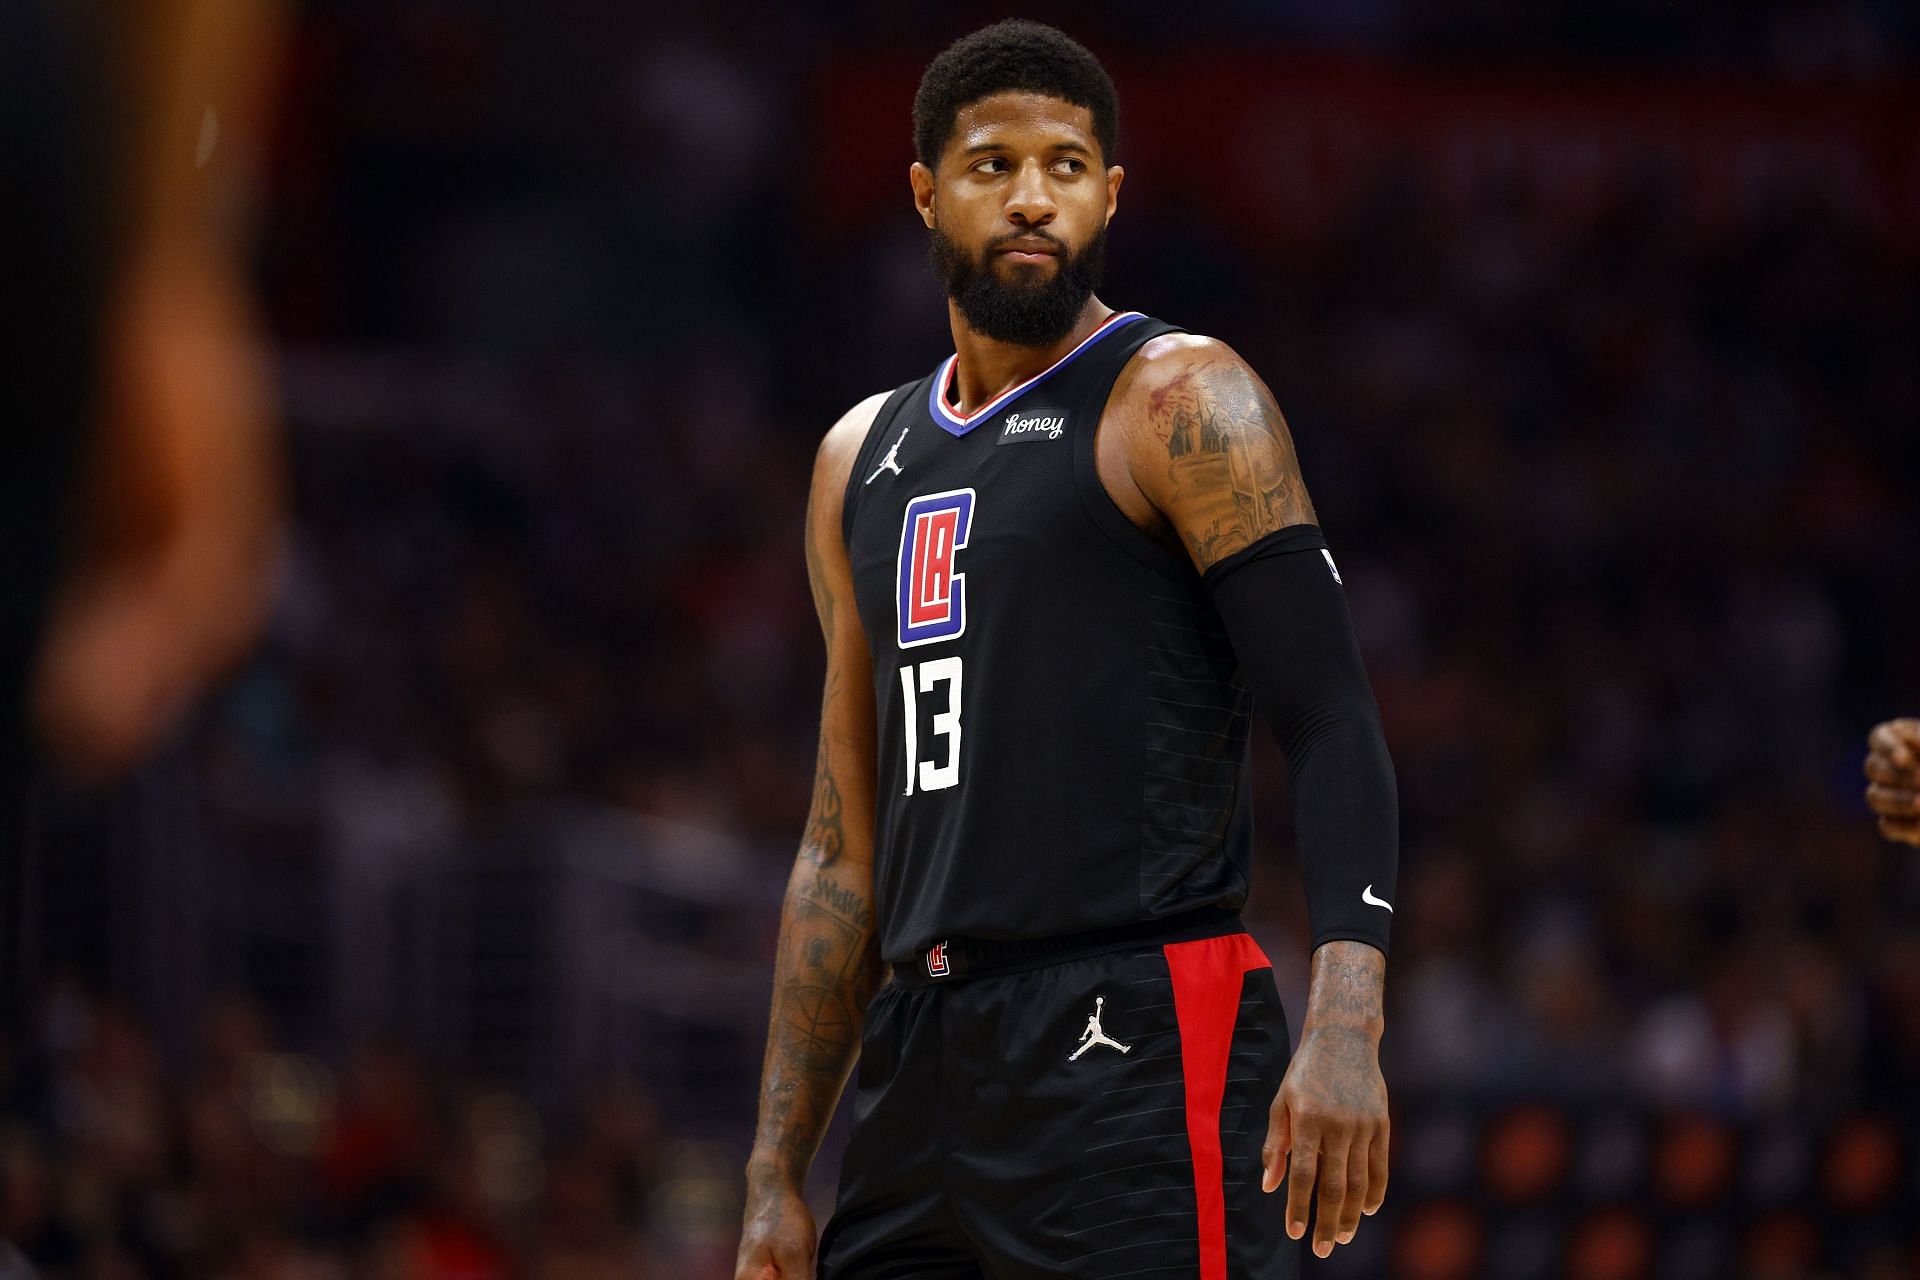 Paul George of the LA Clippers